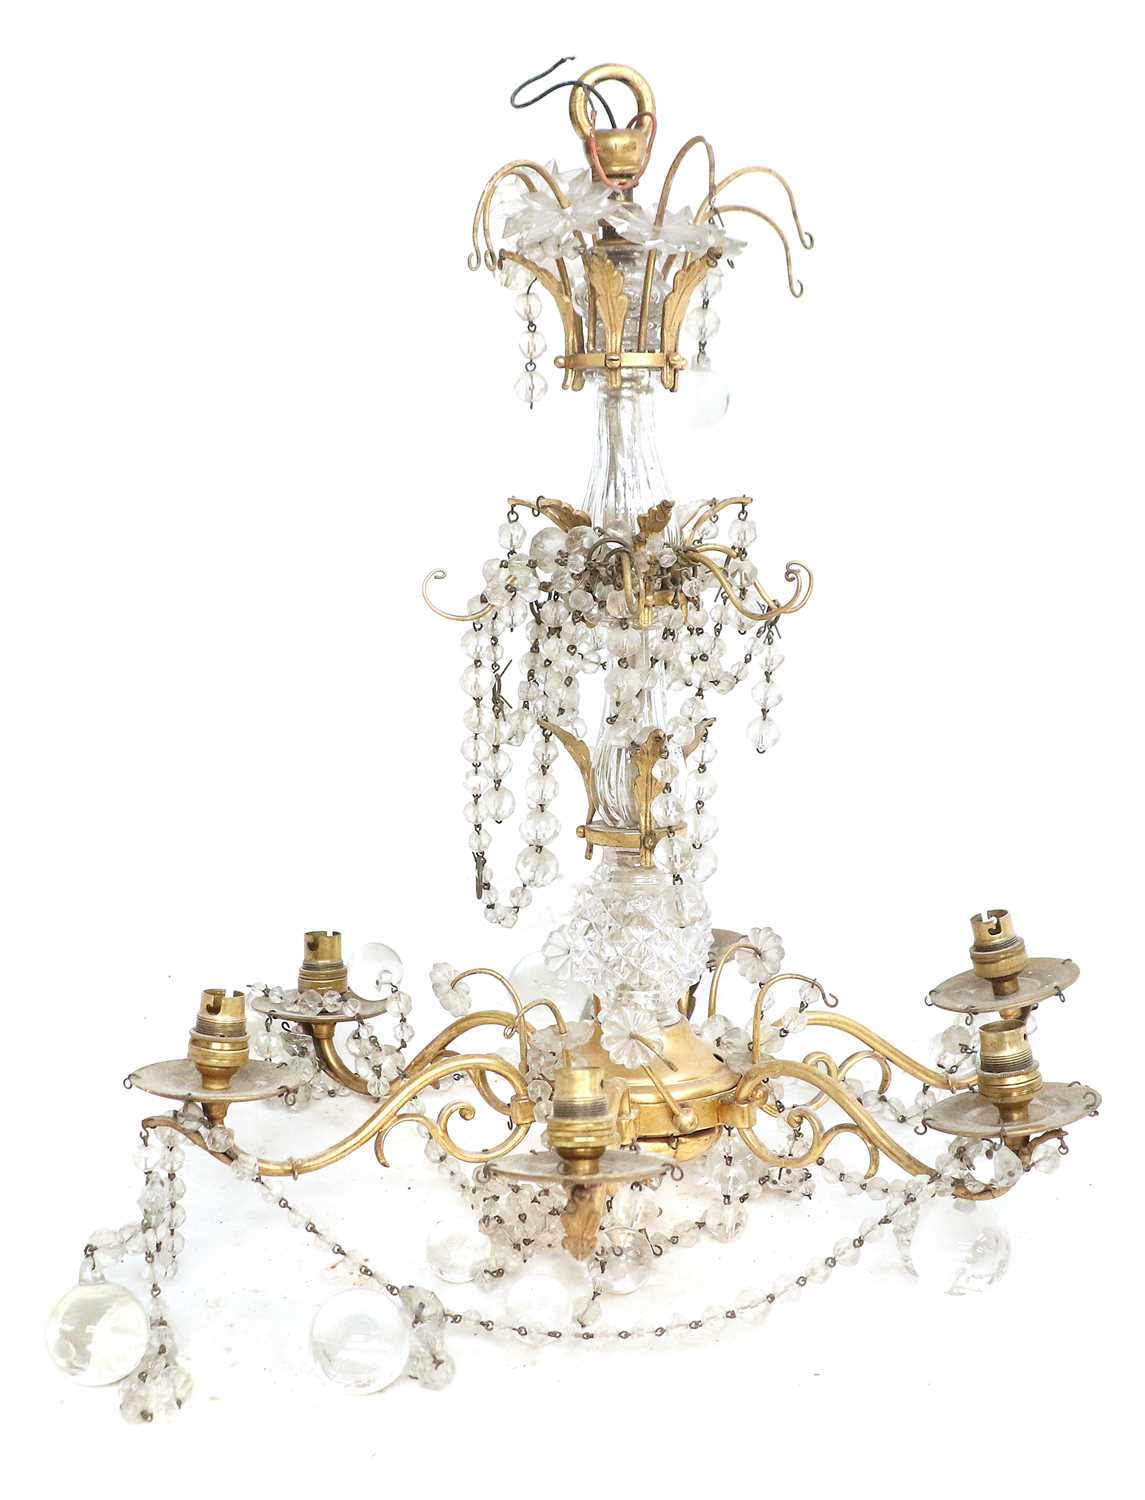 A Cut-Glass-Mounted Gilt-Metal Six-Light Electrolier, late 19th/20th century, with fluted baluster - Image 2 of 7